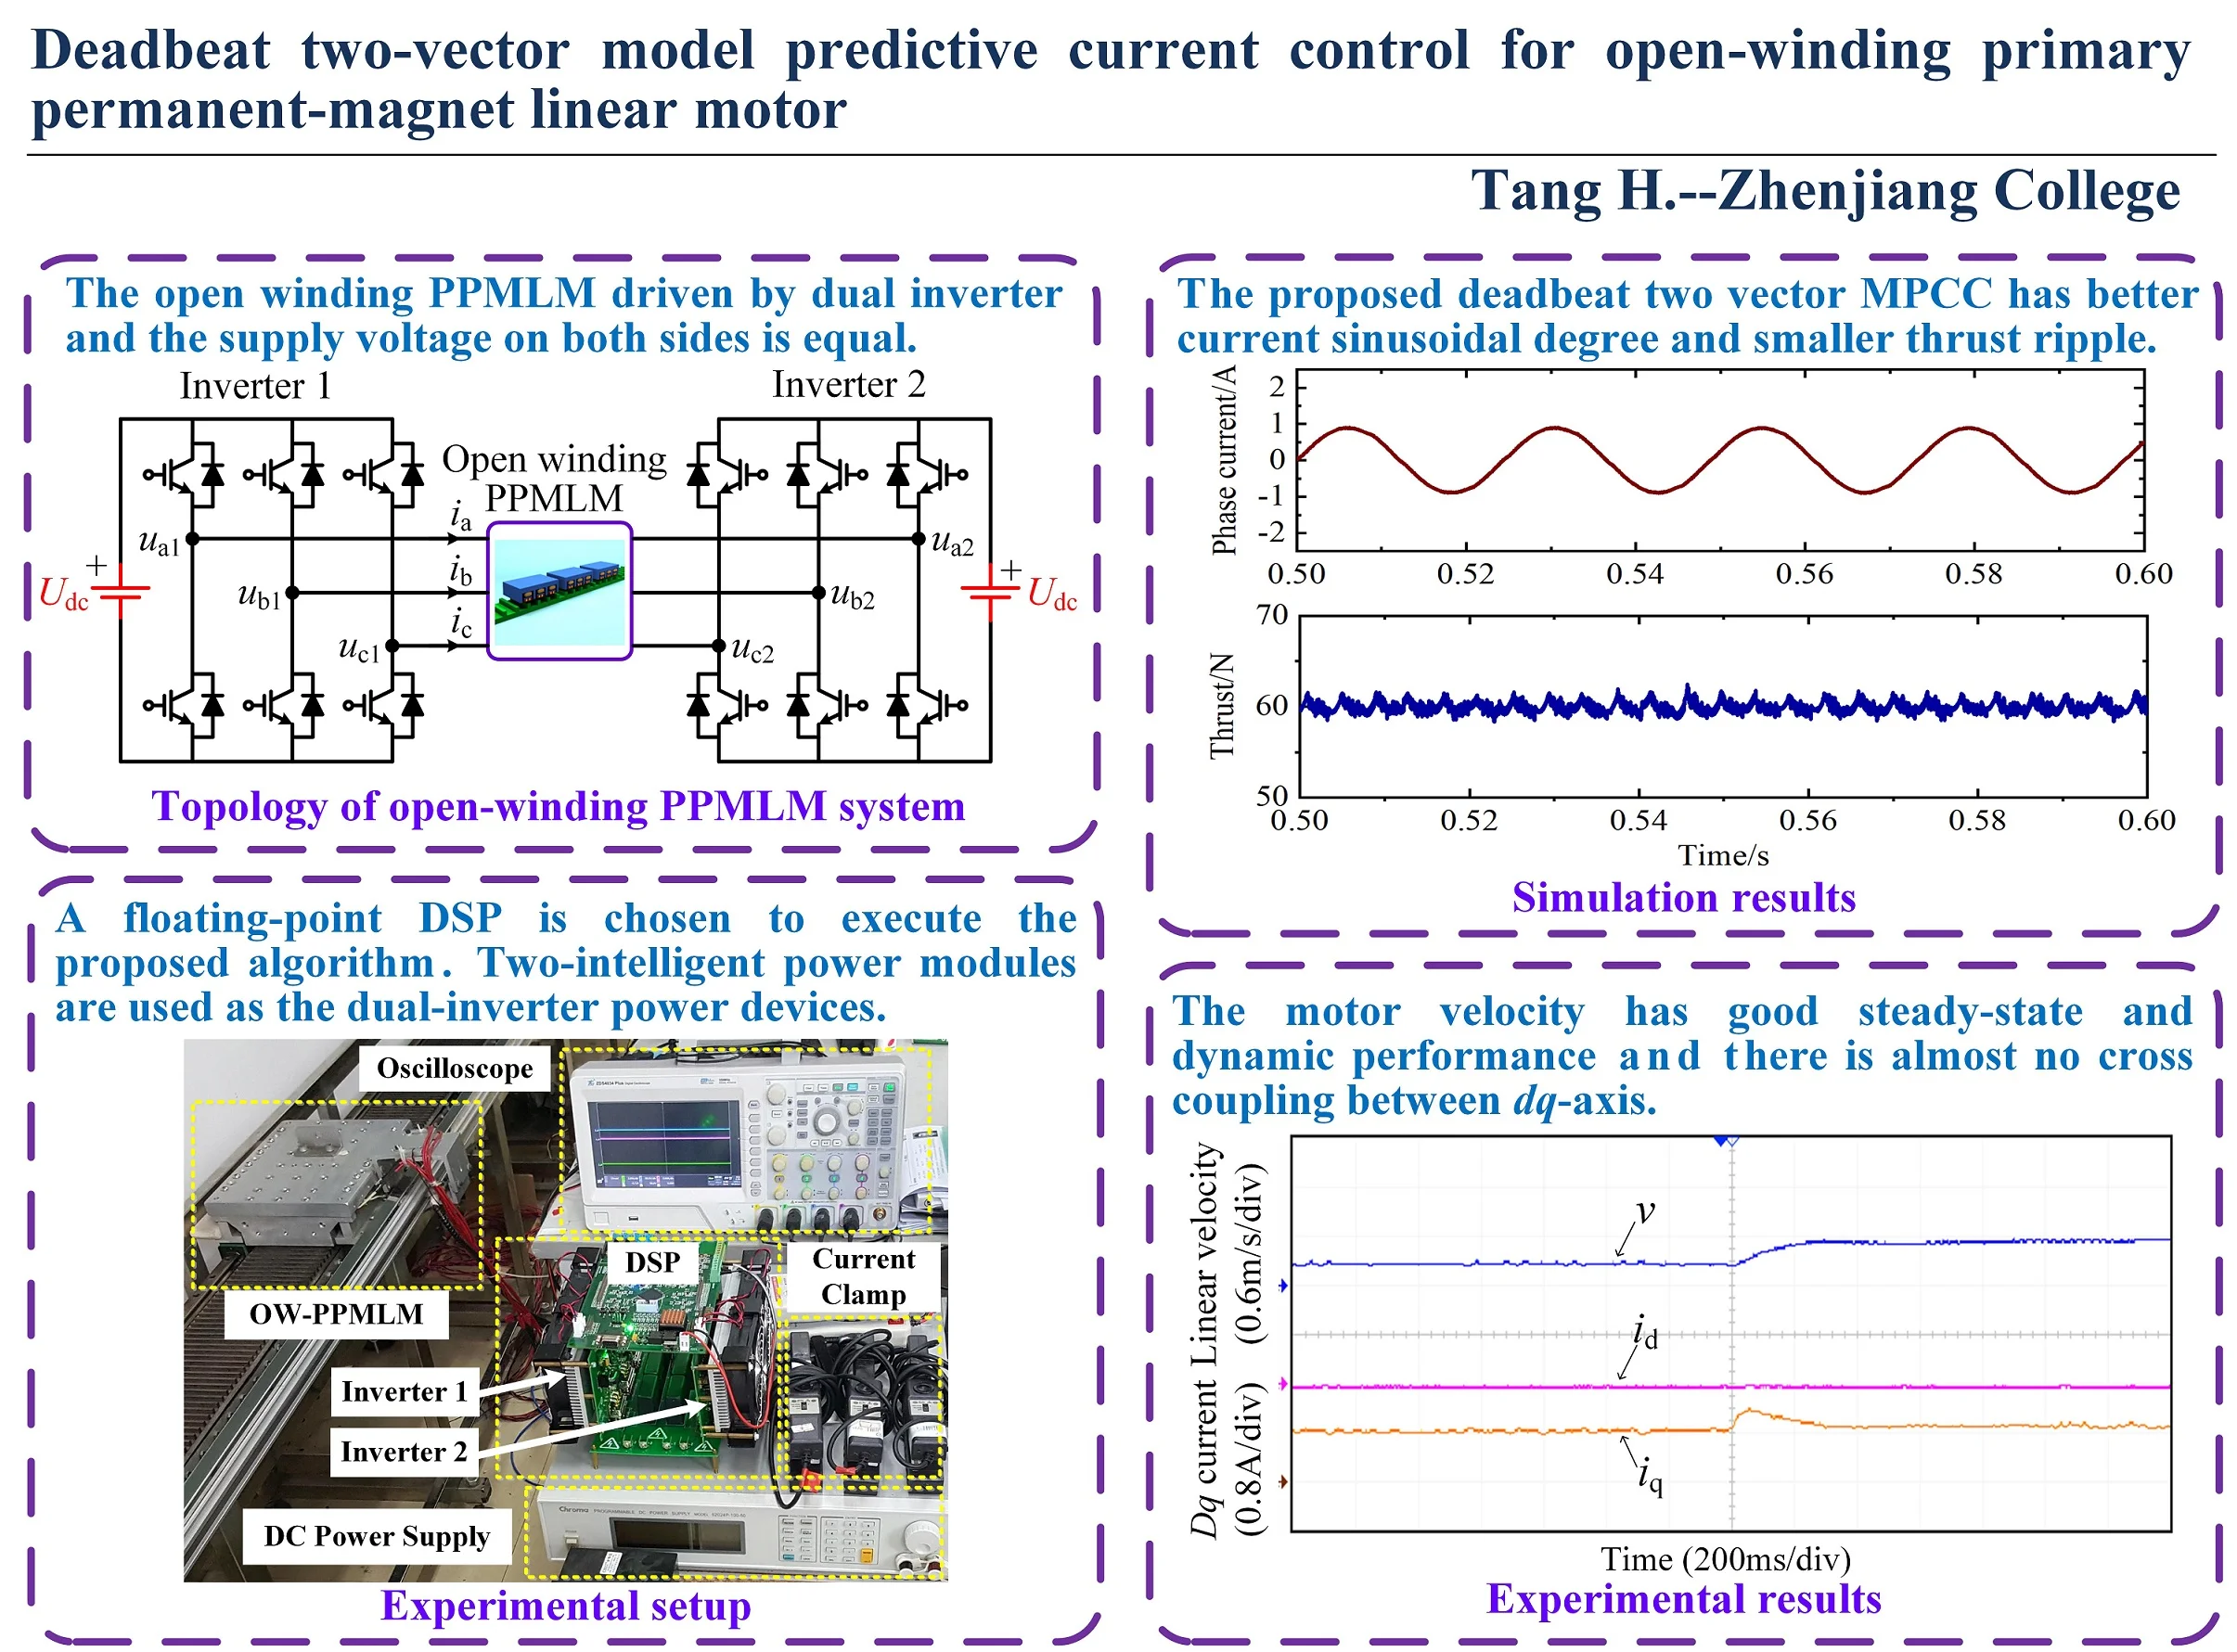 Deadbeat two-vector model predictive current control for open-winding primary permanent-magnet linear motor